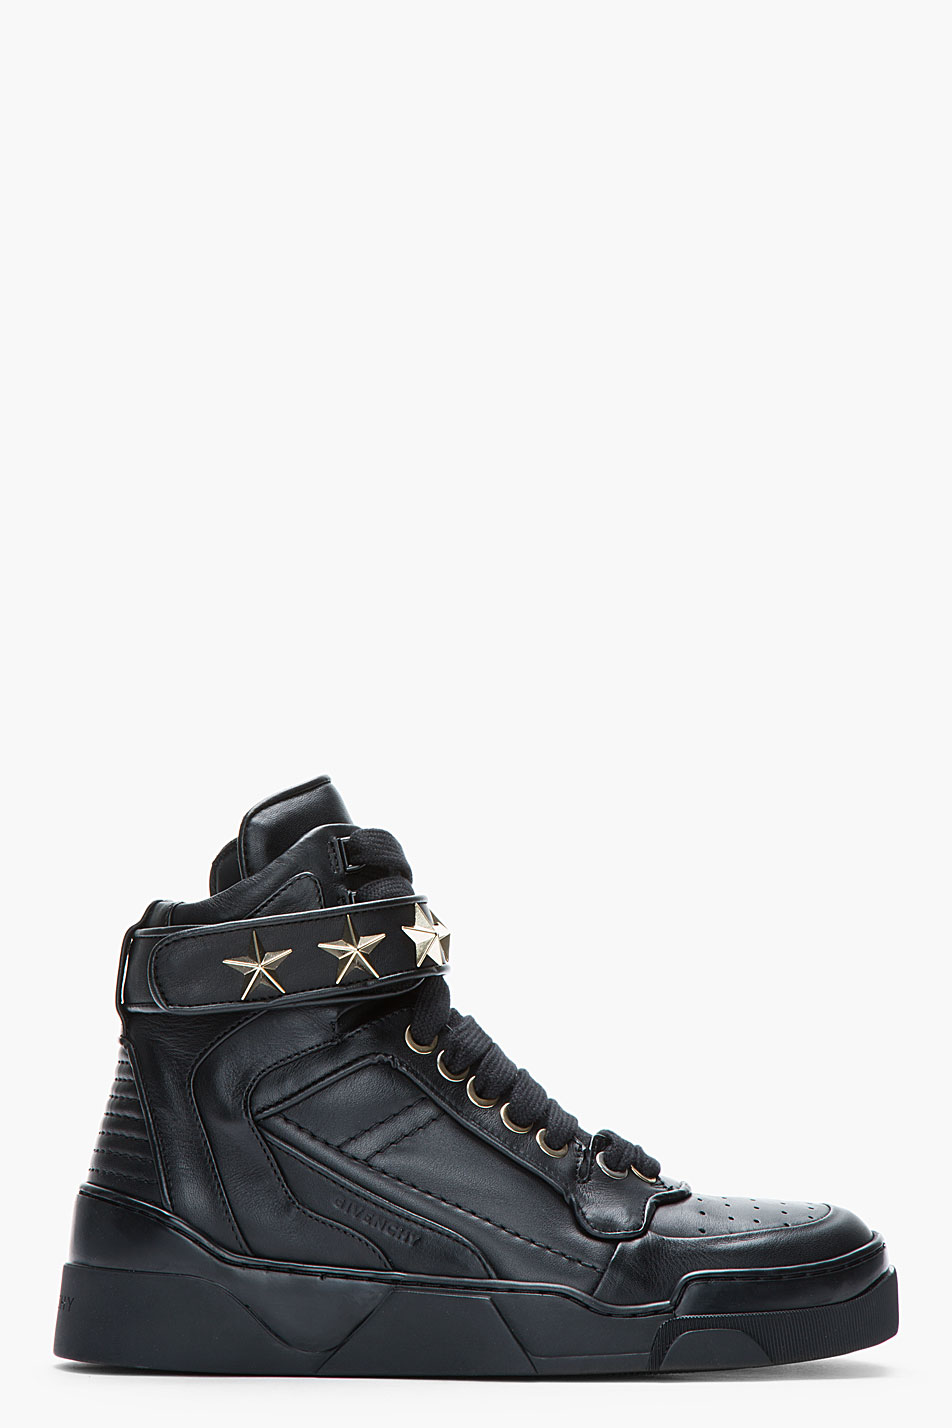 Star-Embellished: The Closest Thing to Streetwear Ball Sneakers | SOLETOPIA